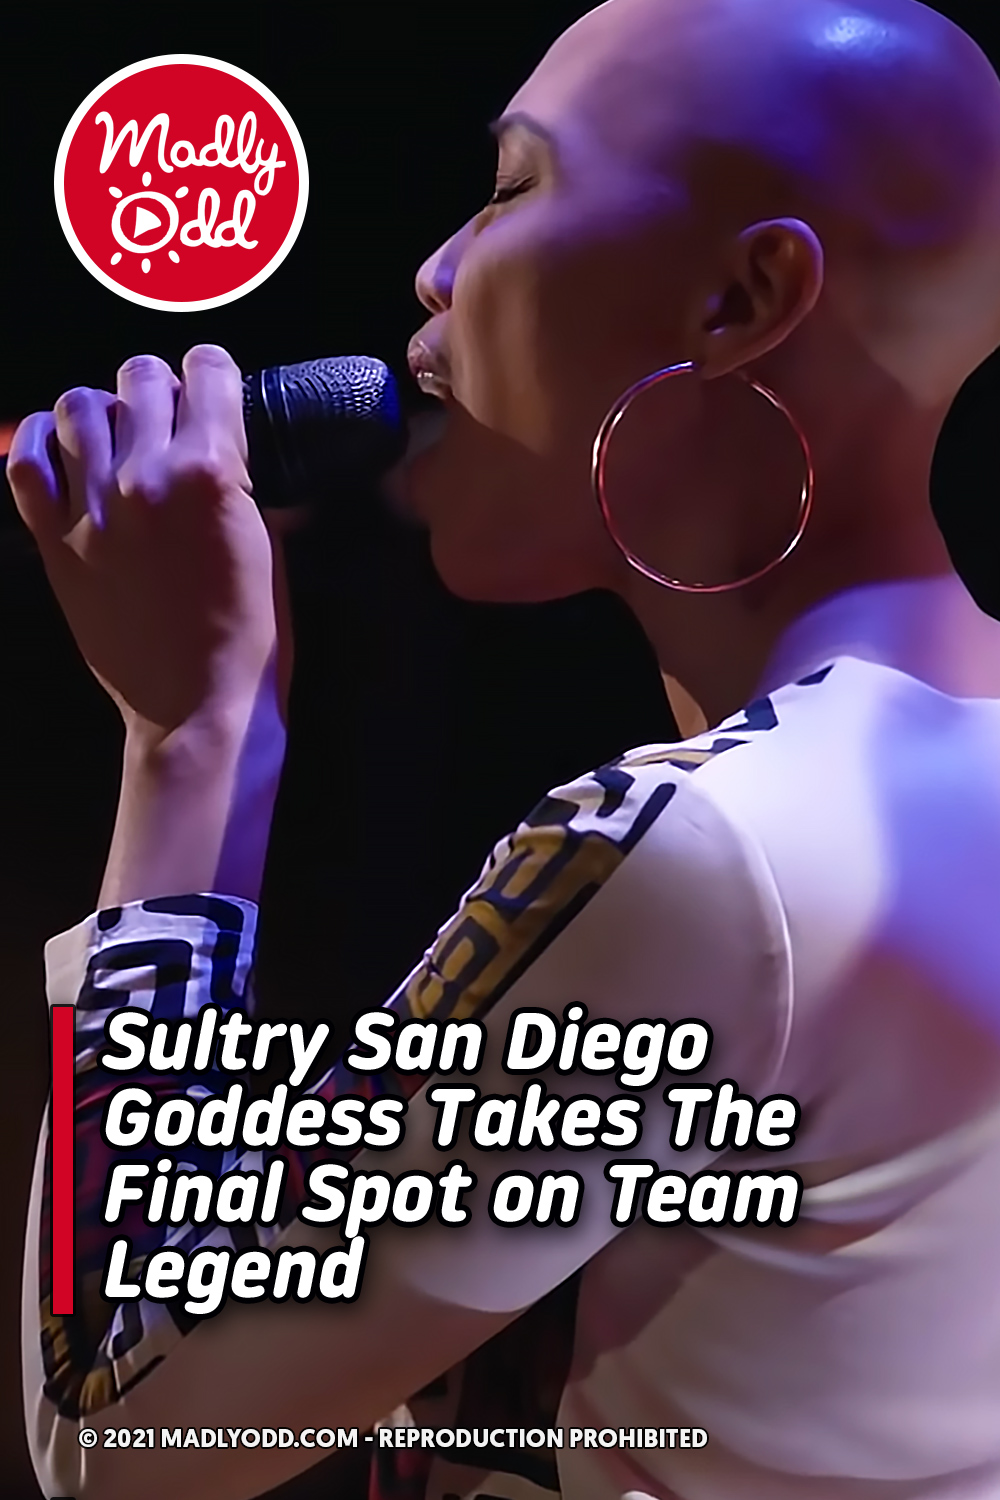 Sultry San Diego Goddess Takes The Final Spot on Team Legend